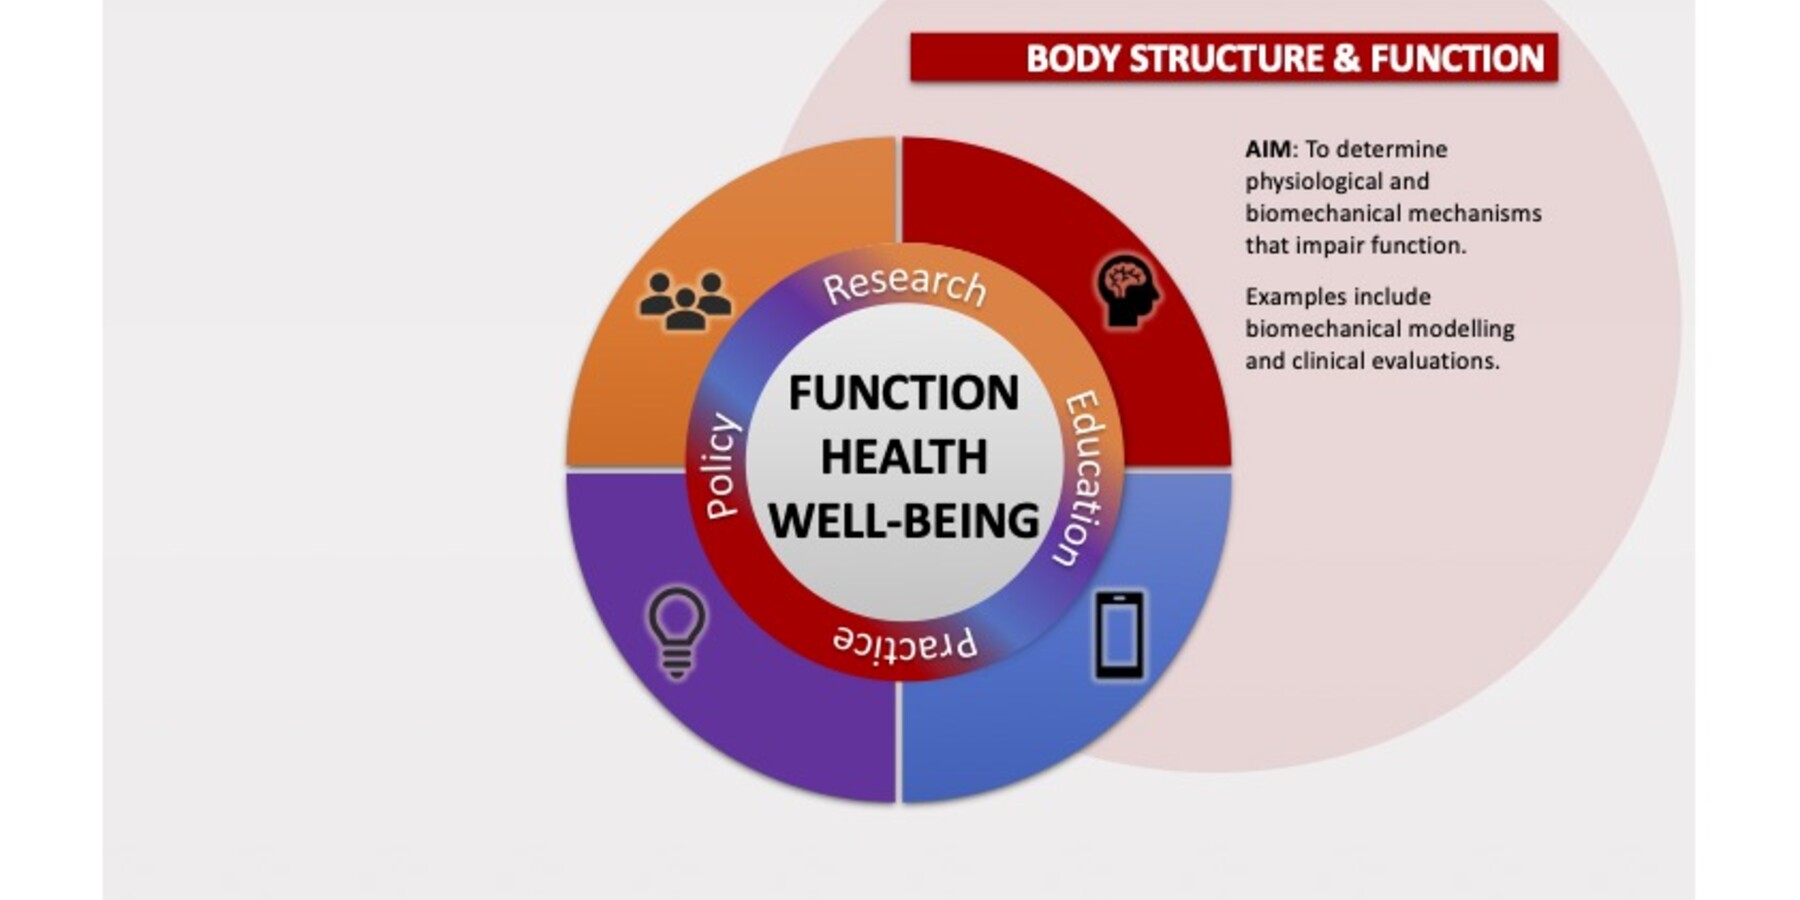 Graphic describing the aim of the Assessing Body Structure & Function research platform 